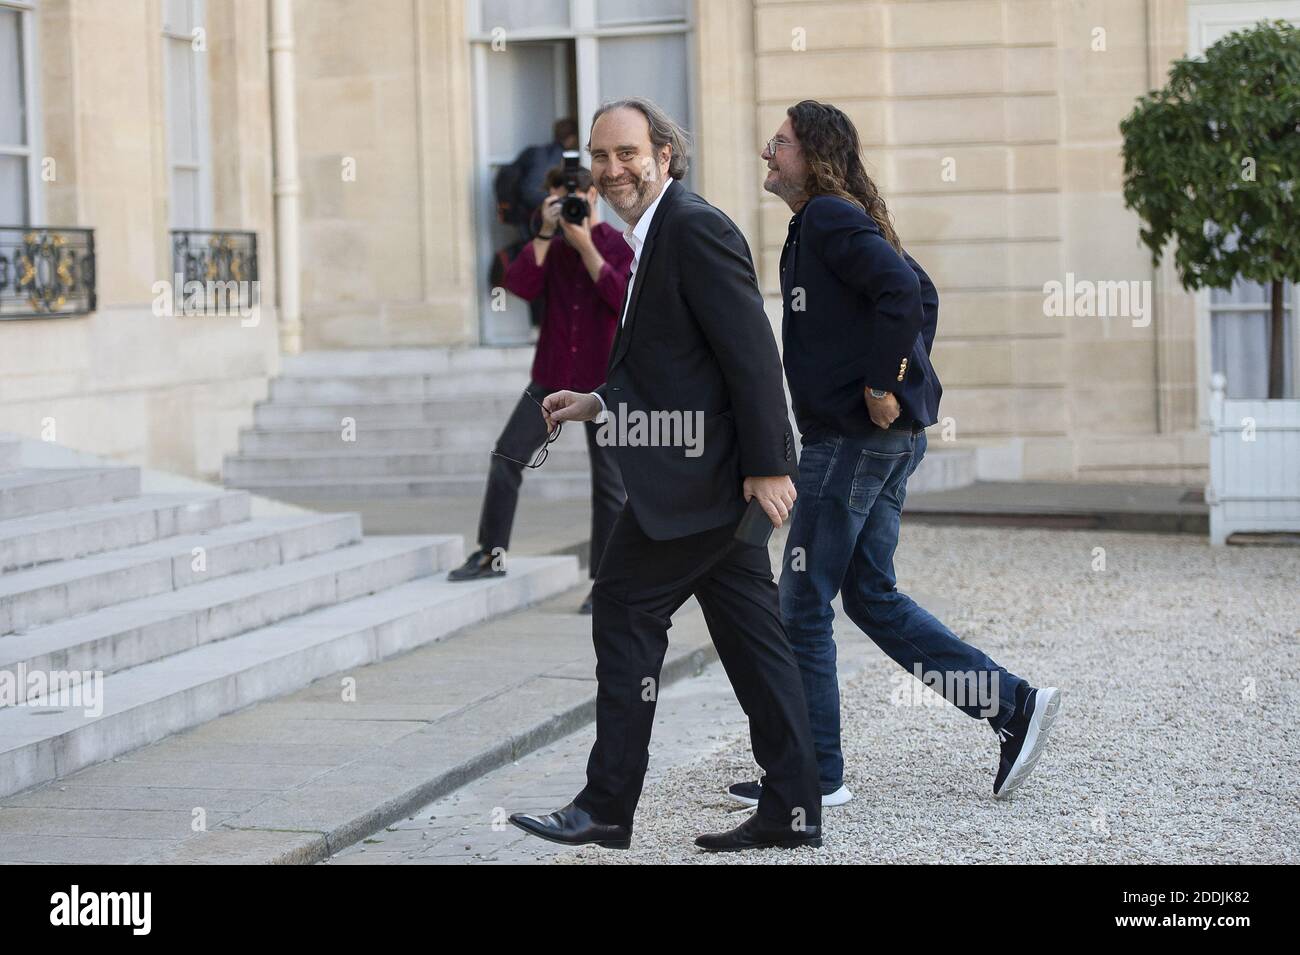 Veepee's CEO Jacques-Antoine Granjon (R) and Iliad's founder Xavier Niel  (L) arrive on September 17, 2019 at the Elysee presidential palace in Paris  to attend a meeting with French President and tech